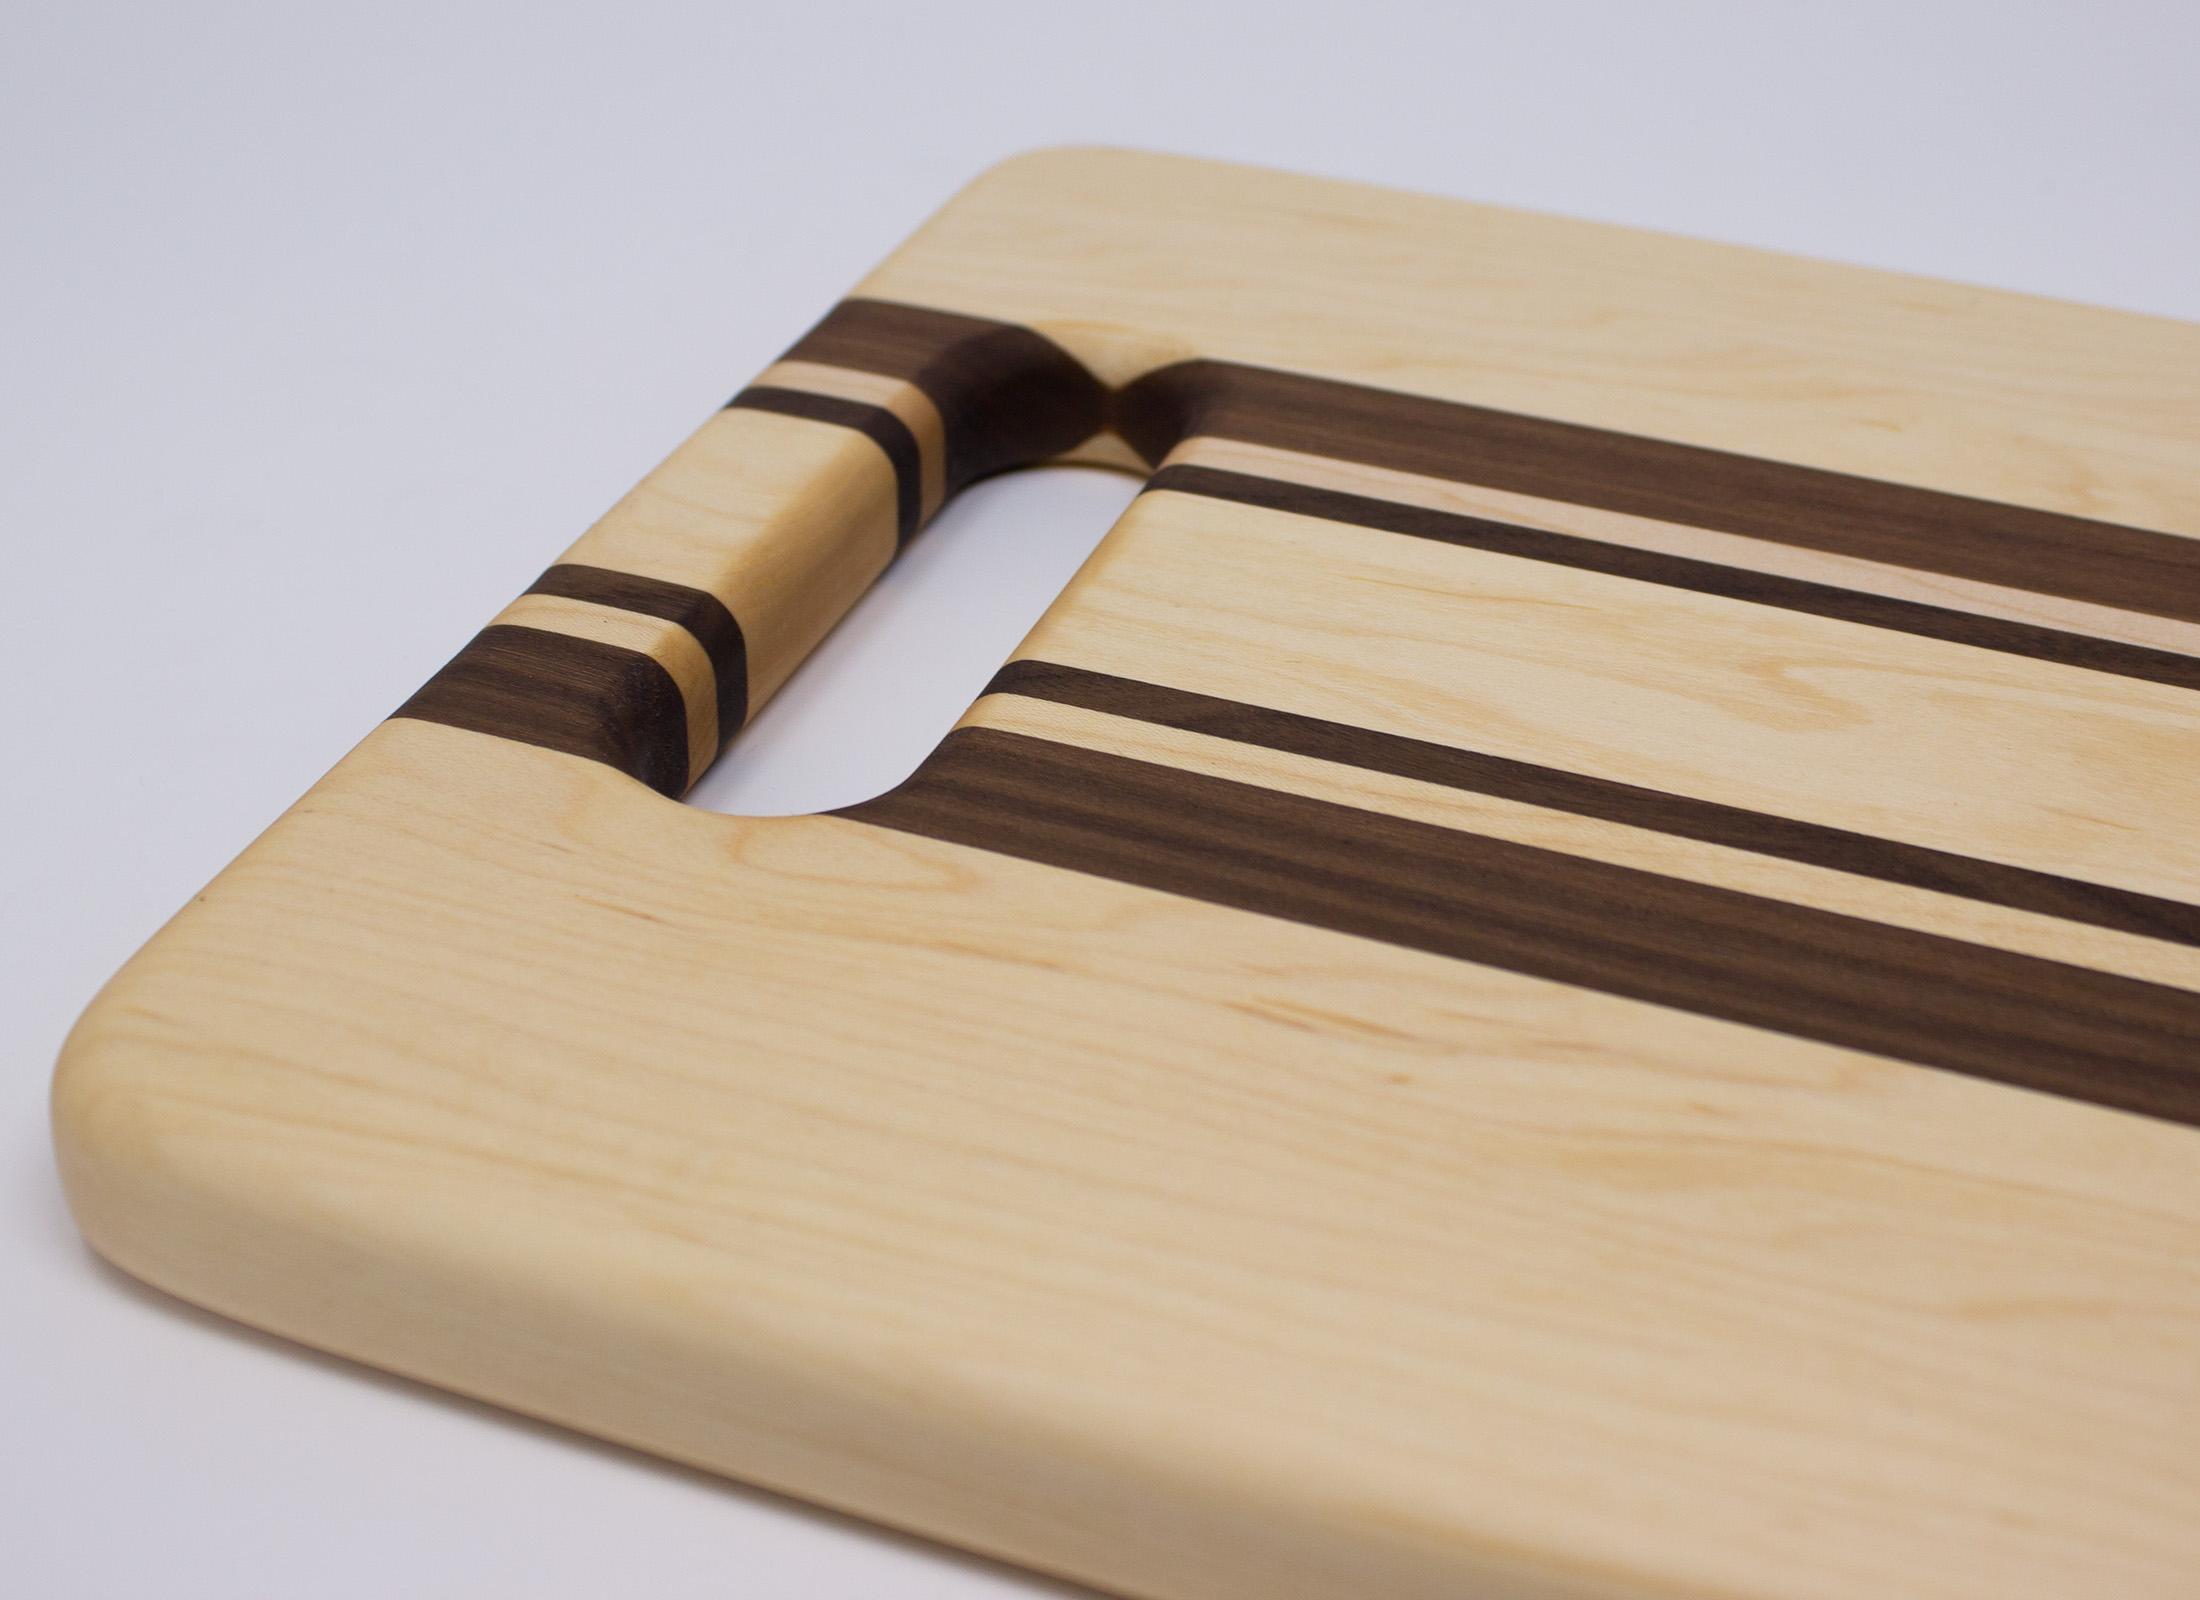 https://www.rockfordwoodcrafts.com/wp-content/uploads/Maple-and-Walnut-with-Handle-Cutting-Board-Top-Angled-Close-Up.jpg